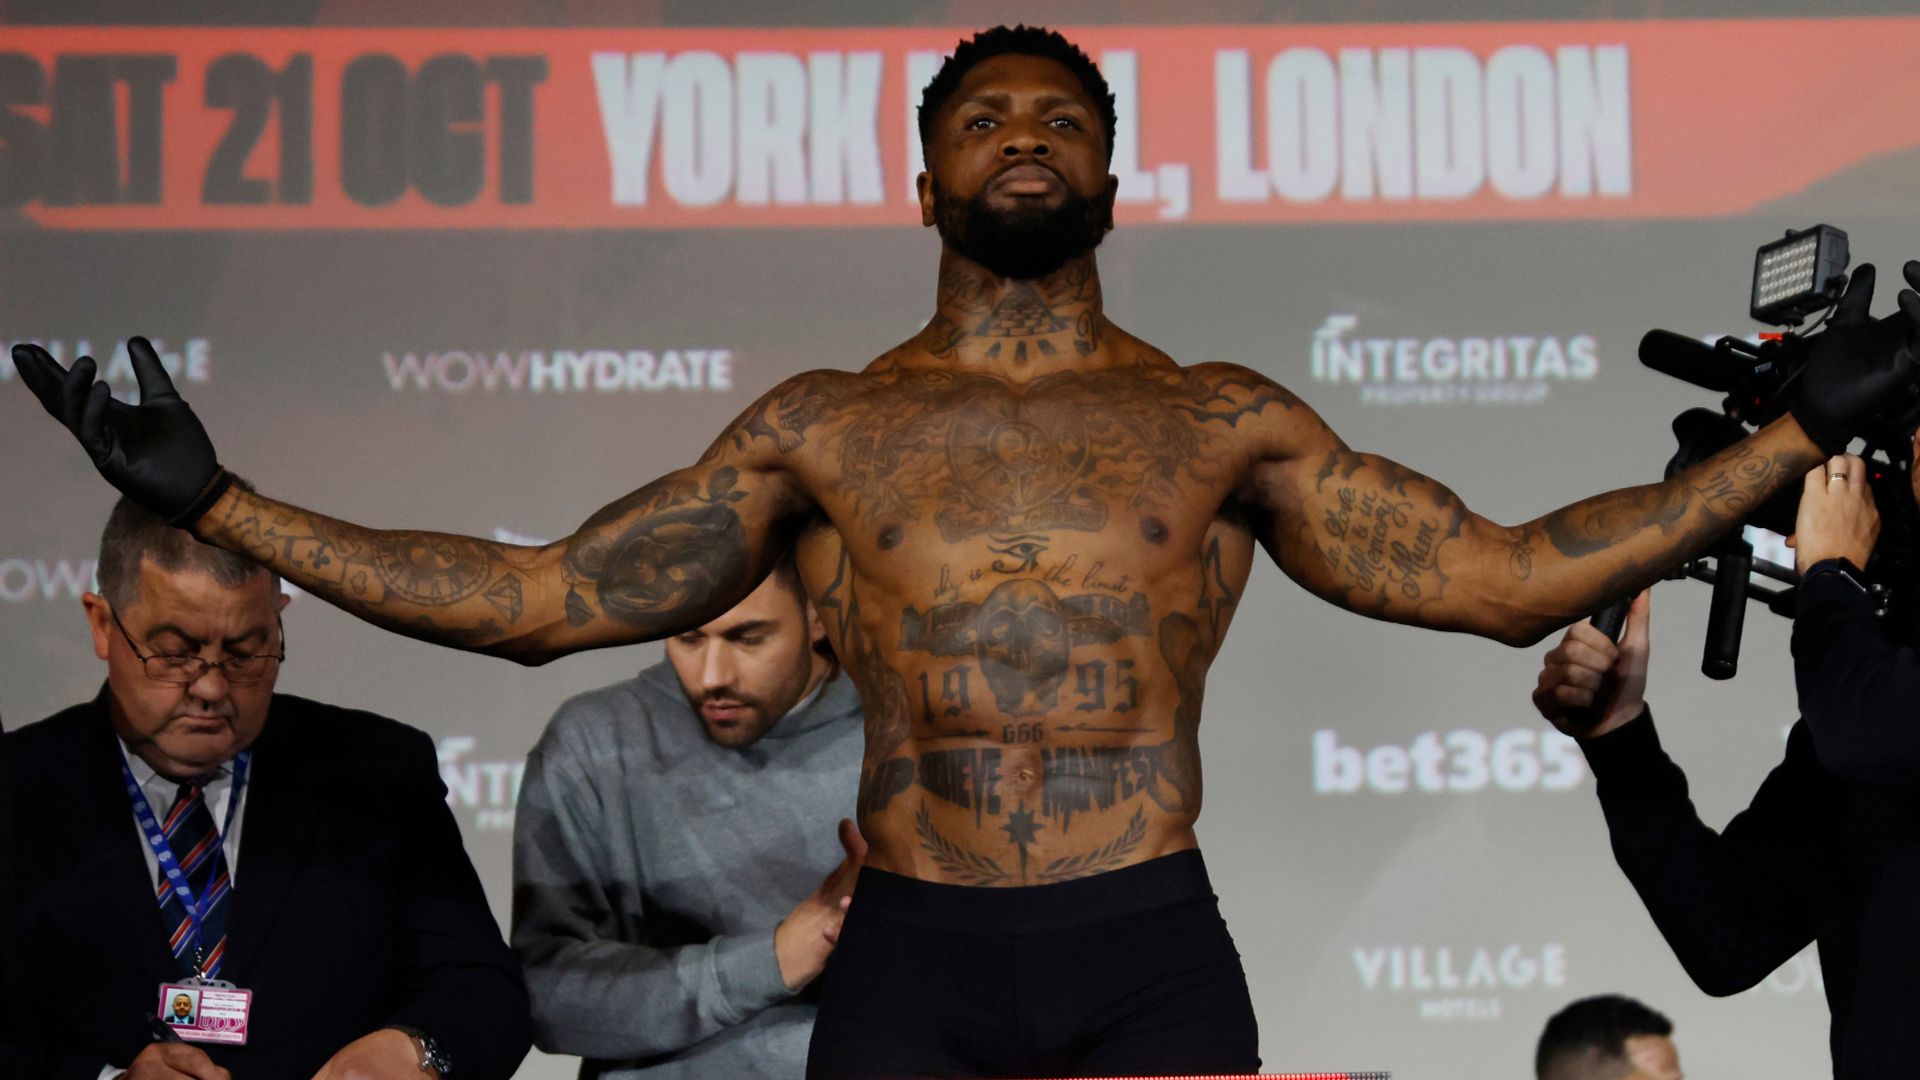 Lawal faced 'hell' to find his purpose for Chamberlain fight